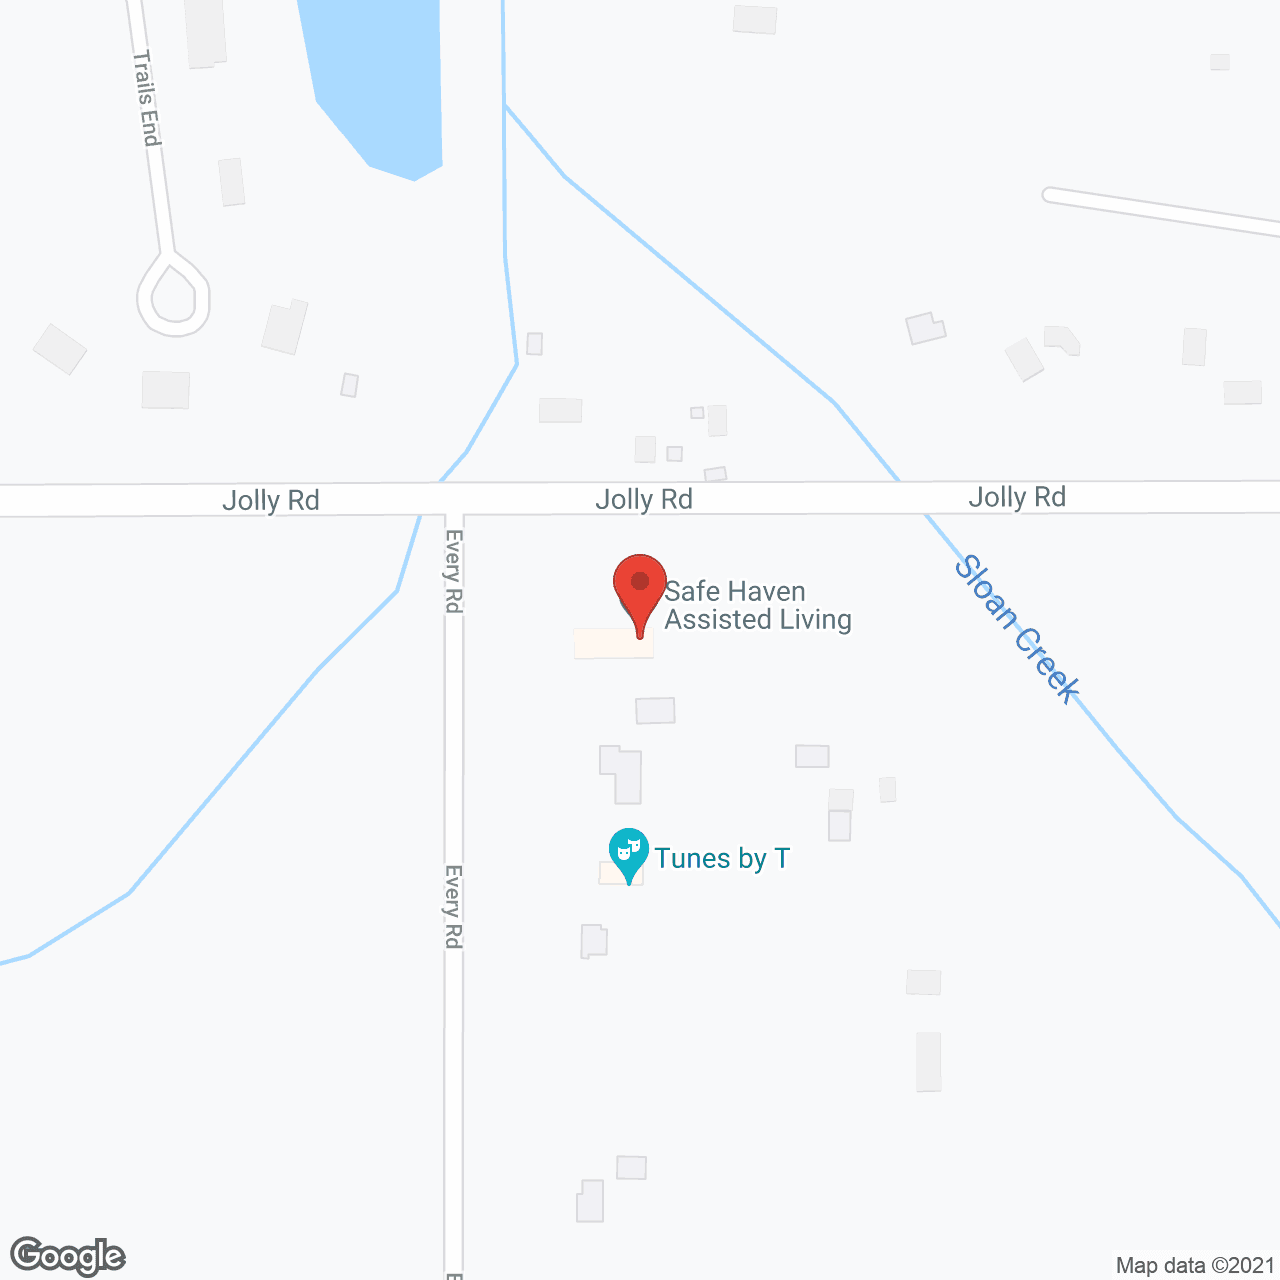 Safe Haven Assisted Living in google map